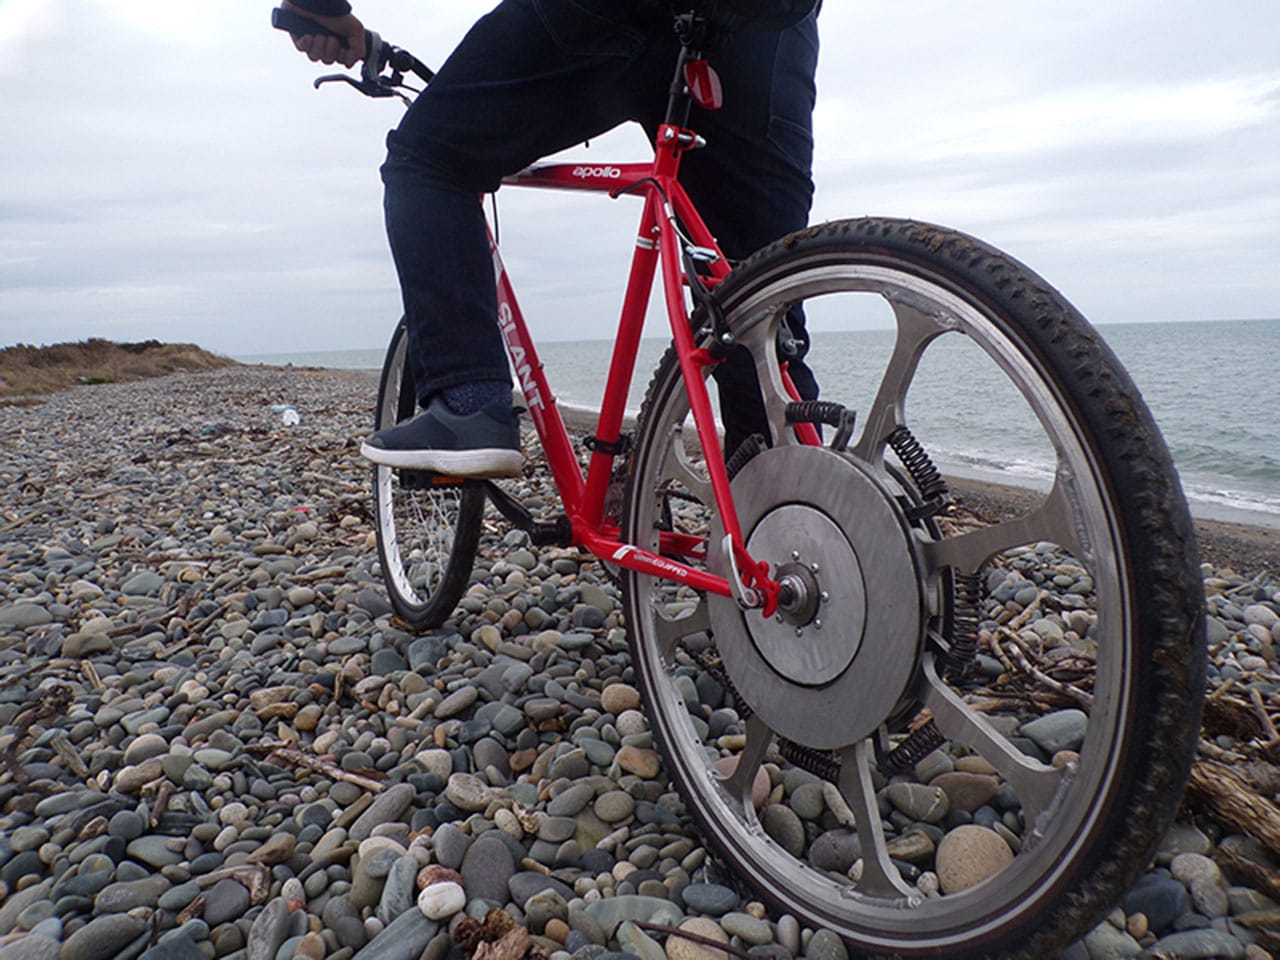 SuperWheel turns your bike into a power-assisted bike with unlimited range.